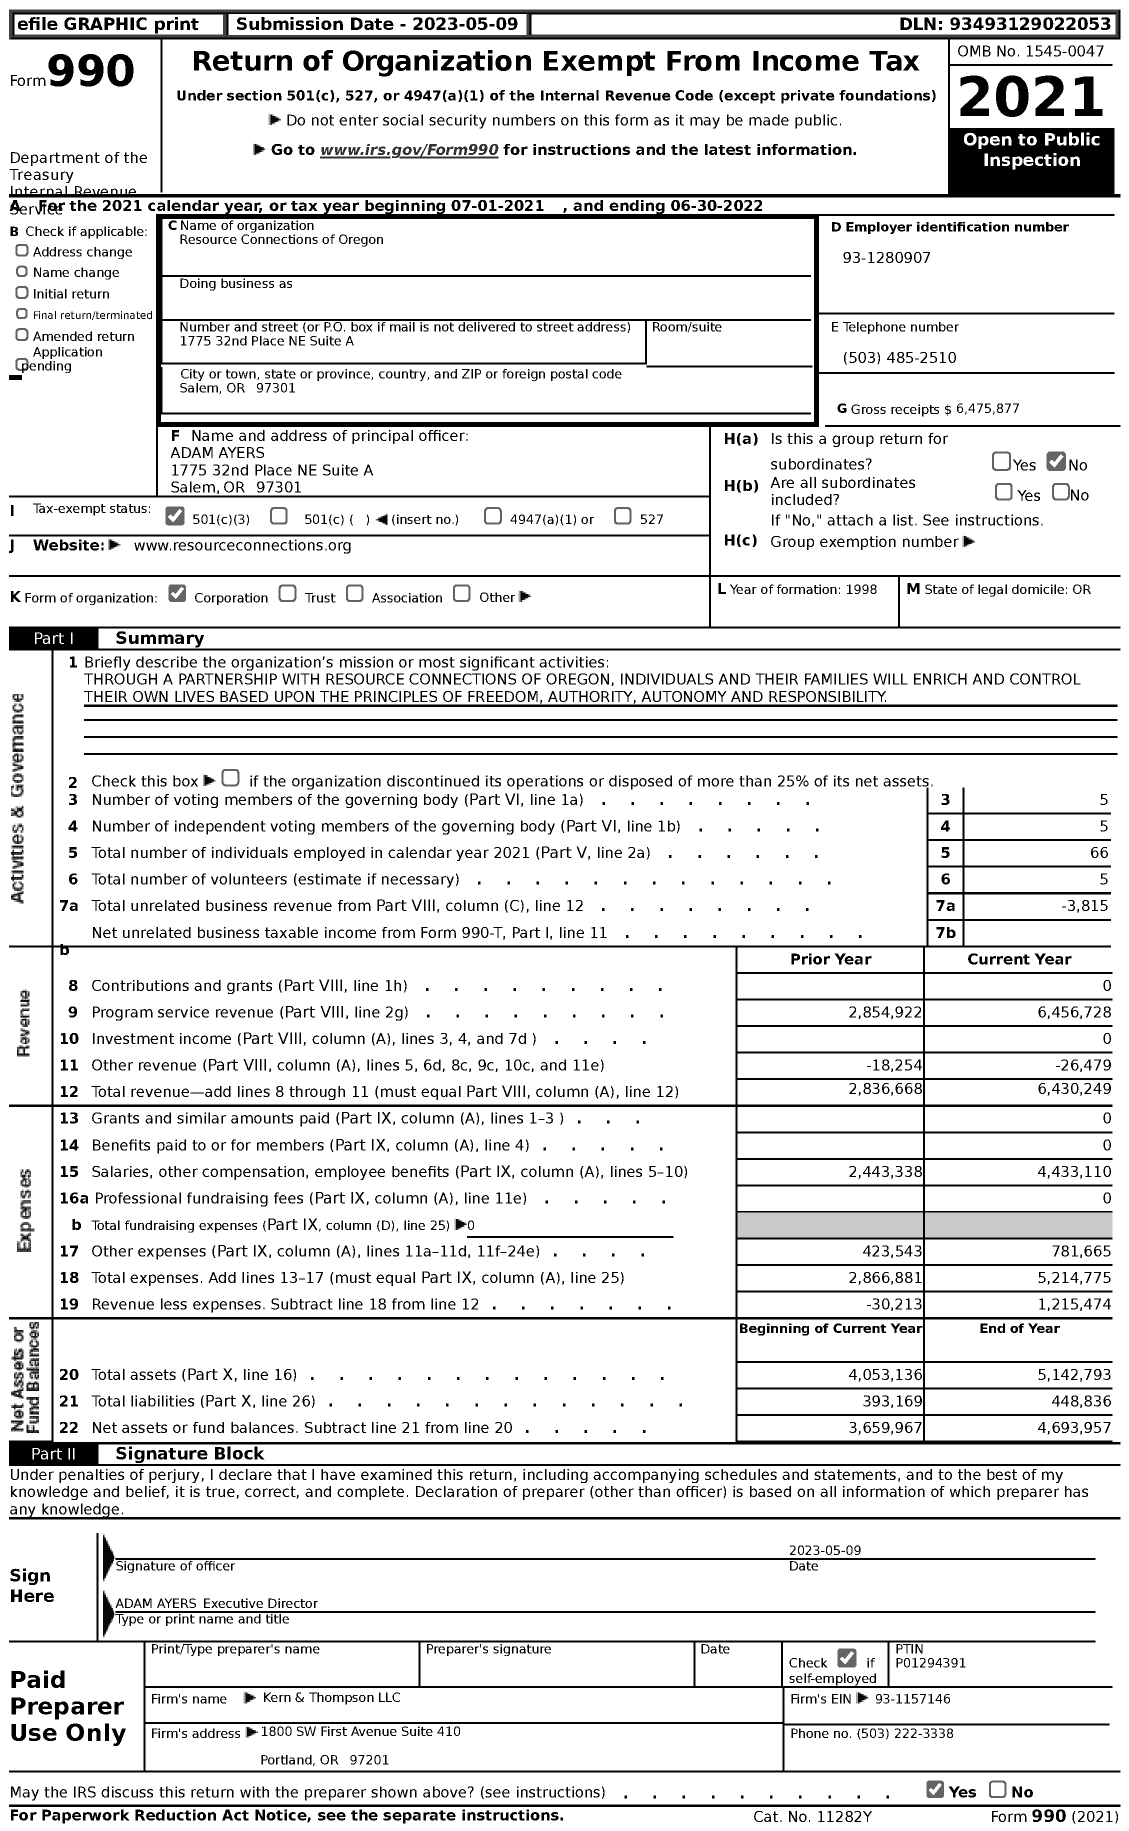 Image of first page of 2021 Form 990 for Resource Connections of Oregon (RCO)